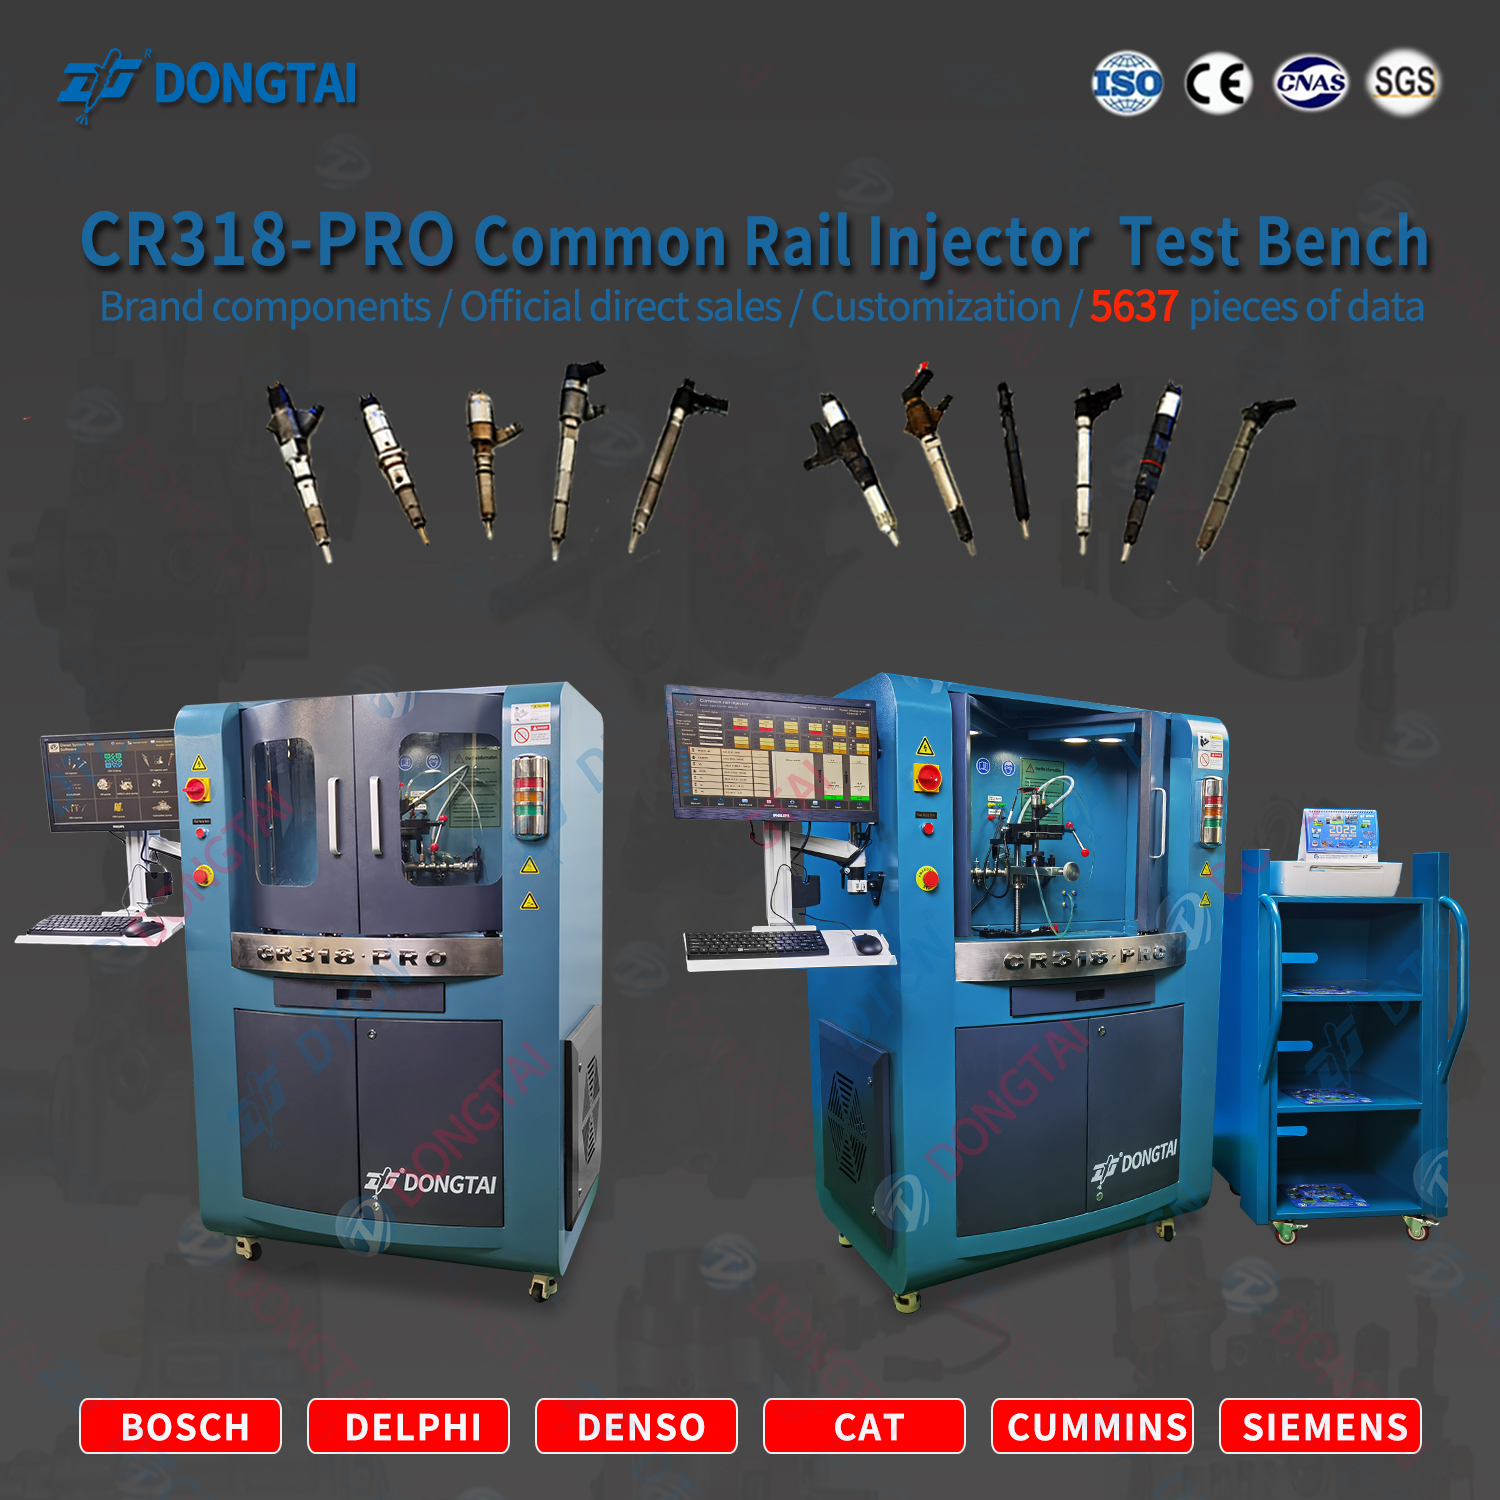 CR318-PRO Common Rail Injector Test Bench Featured Image